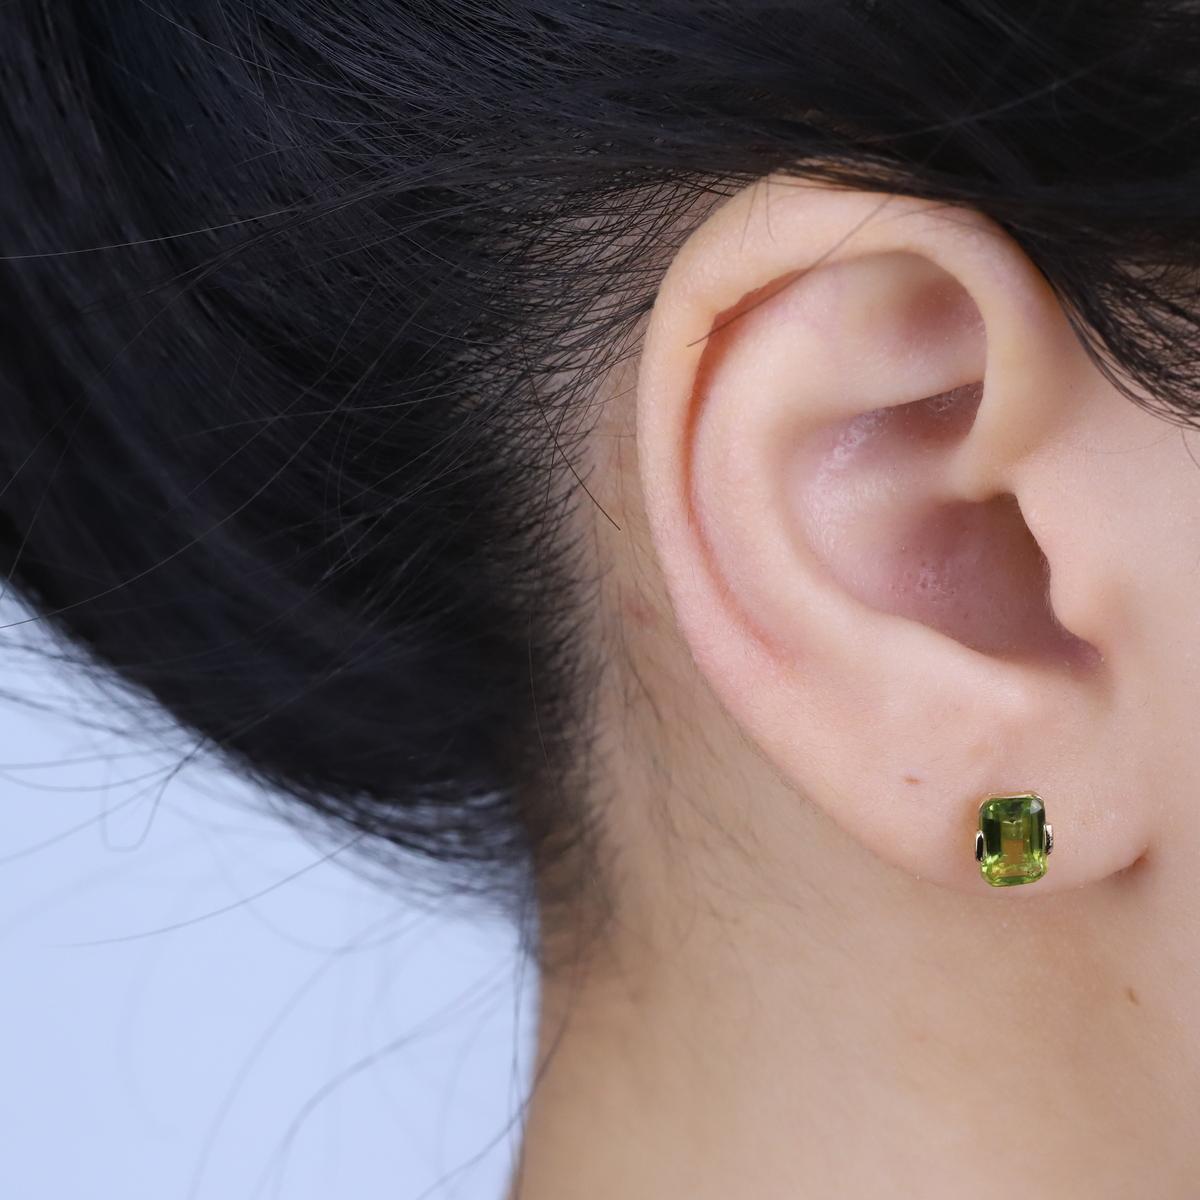 Decorate yourself in elegance with this Earring is crafted from 10-karat Yellow Gold by Gin & Grace Earring. This Earring is made up of Emerald-Cut Peridot (2 pcs) 2.04 carat. This Earring is weight 0.84 grams. This delicate Earring is polished to a